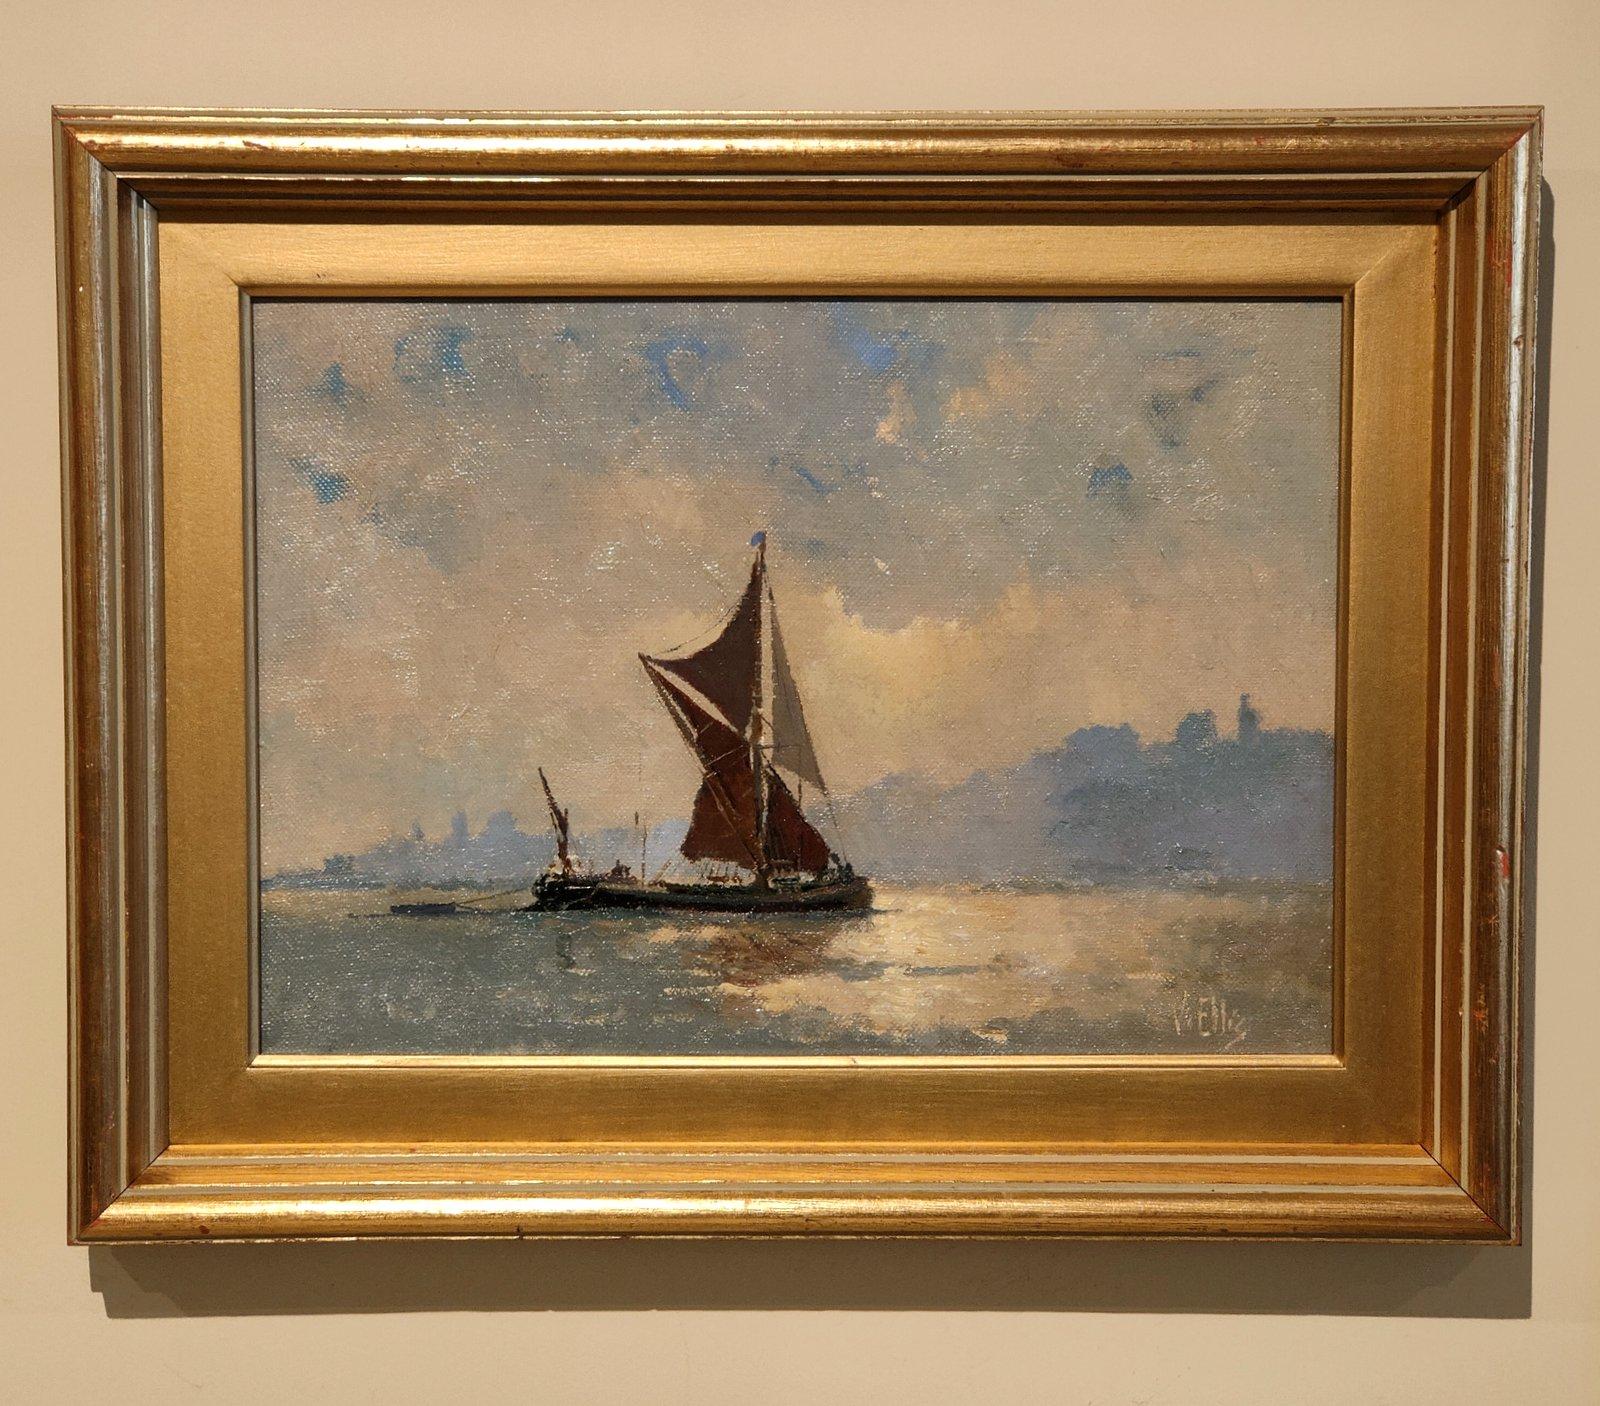 Oil Painting by Victor William Ellis "A Thames Barge, Evening"  Victor William Ellis DSM, RSMA 1921 -1984 . Marine painter of all types of ships past and present. mainly east coast and Thames near his native Canvey Island. Worked Atlantic conveys in